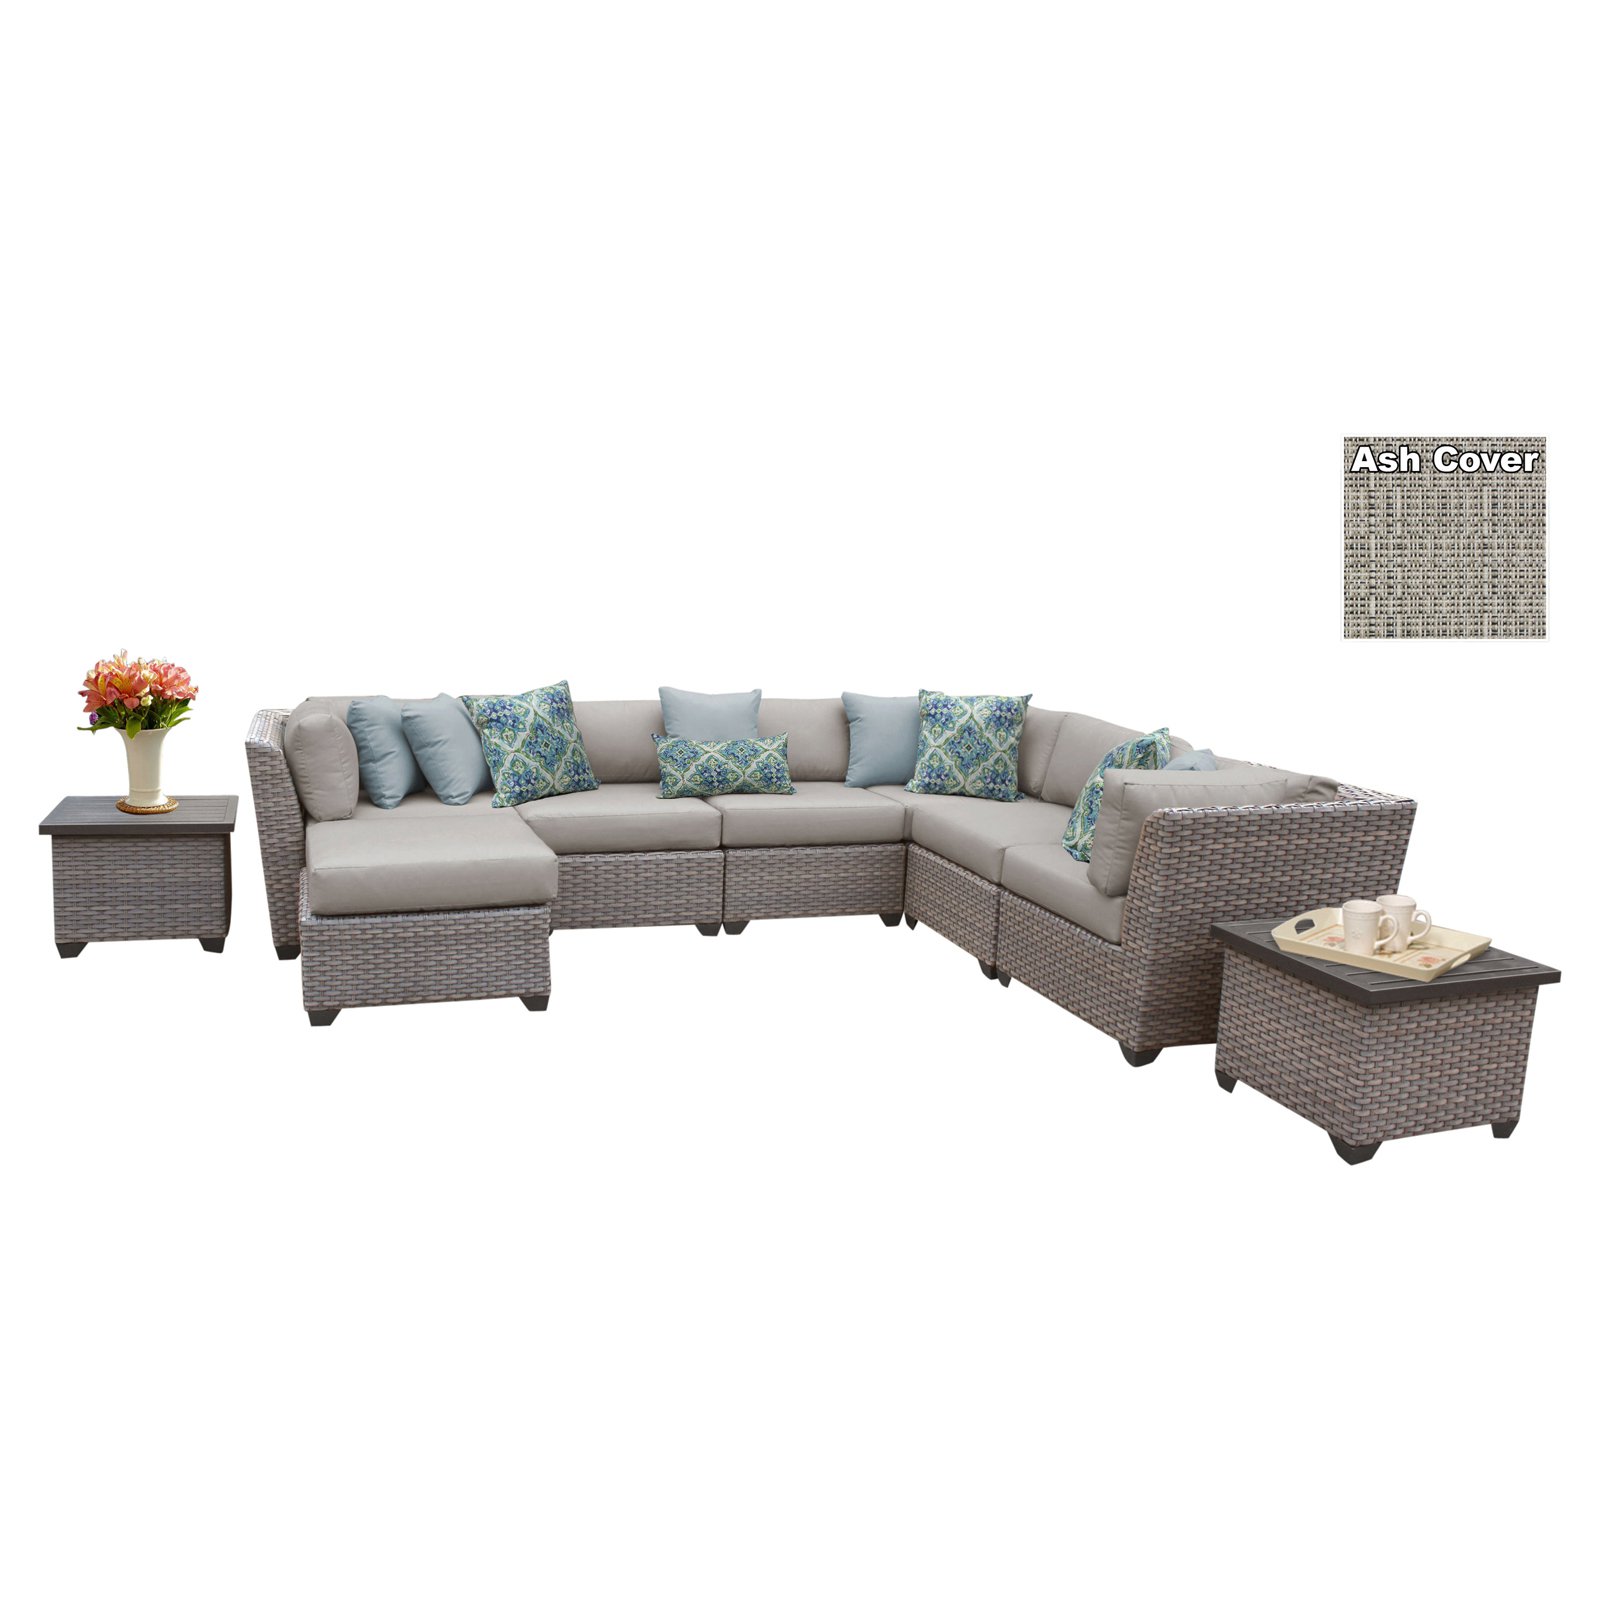 TK Classics Florence Wicker 9 Piece Patio Conversation Set with Ottoman and 2 Sets of Cushion Covers - image 1 of 2